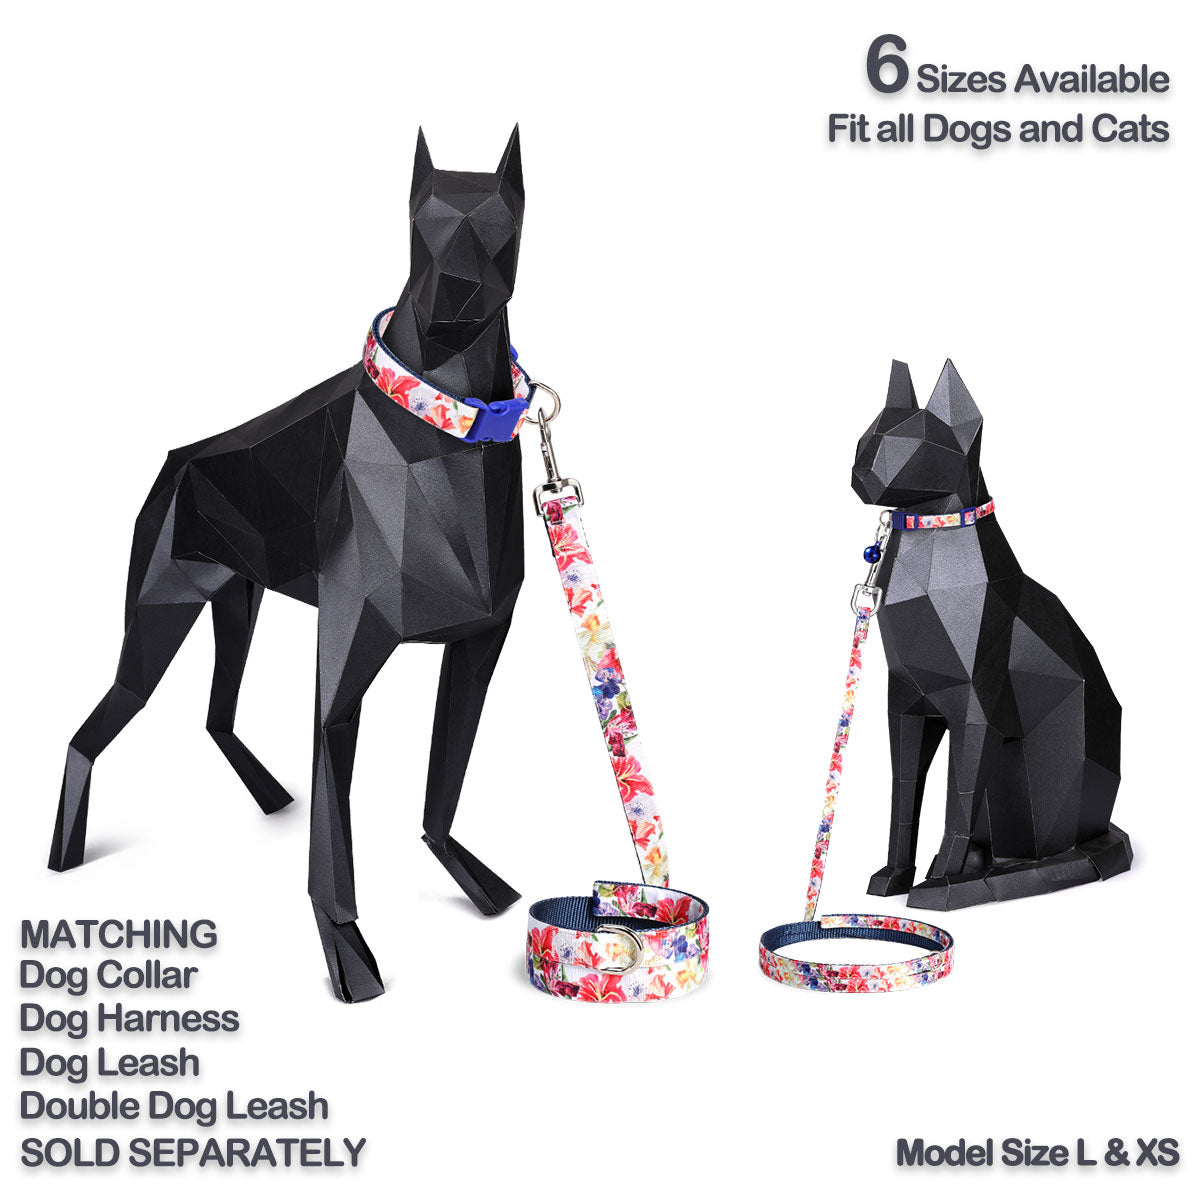 Lily Collar and Leash Set - The New York Dog Shop